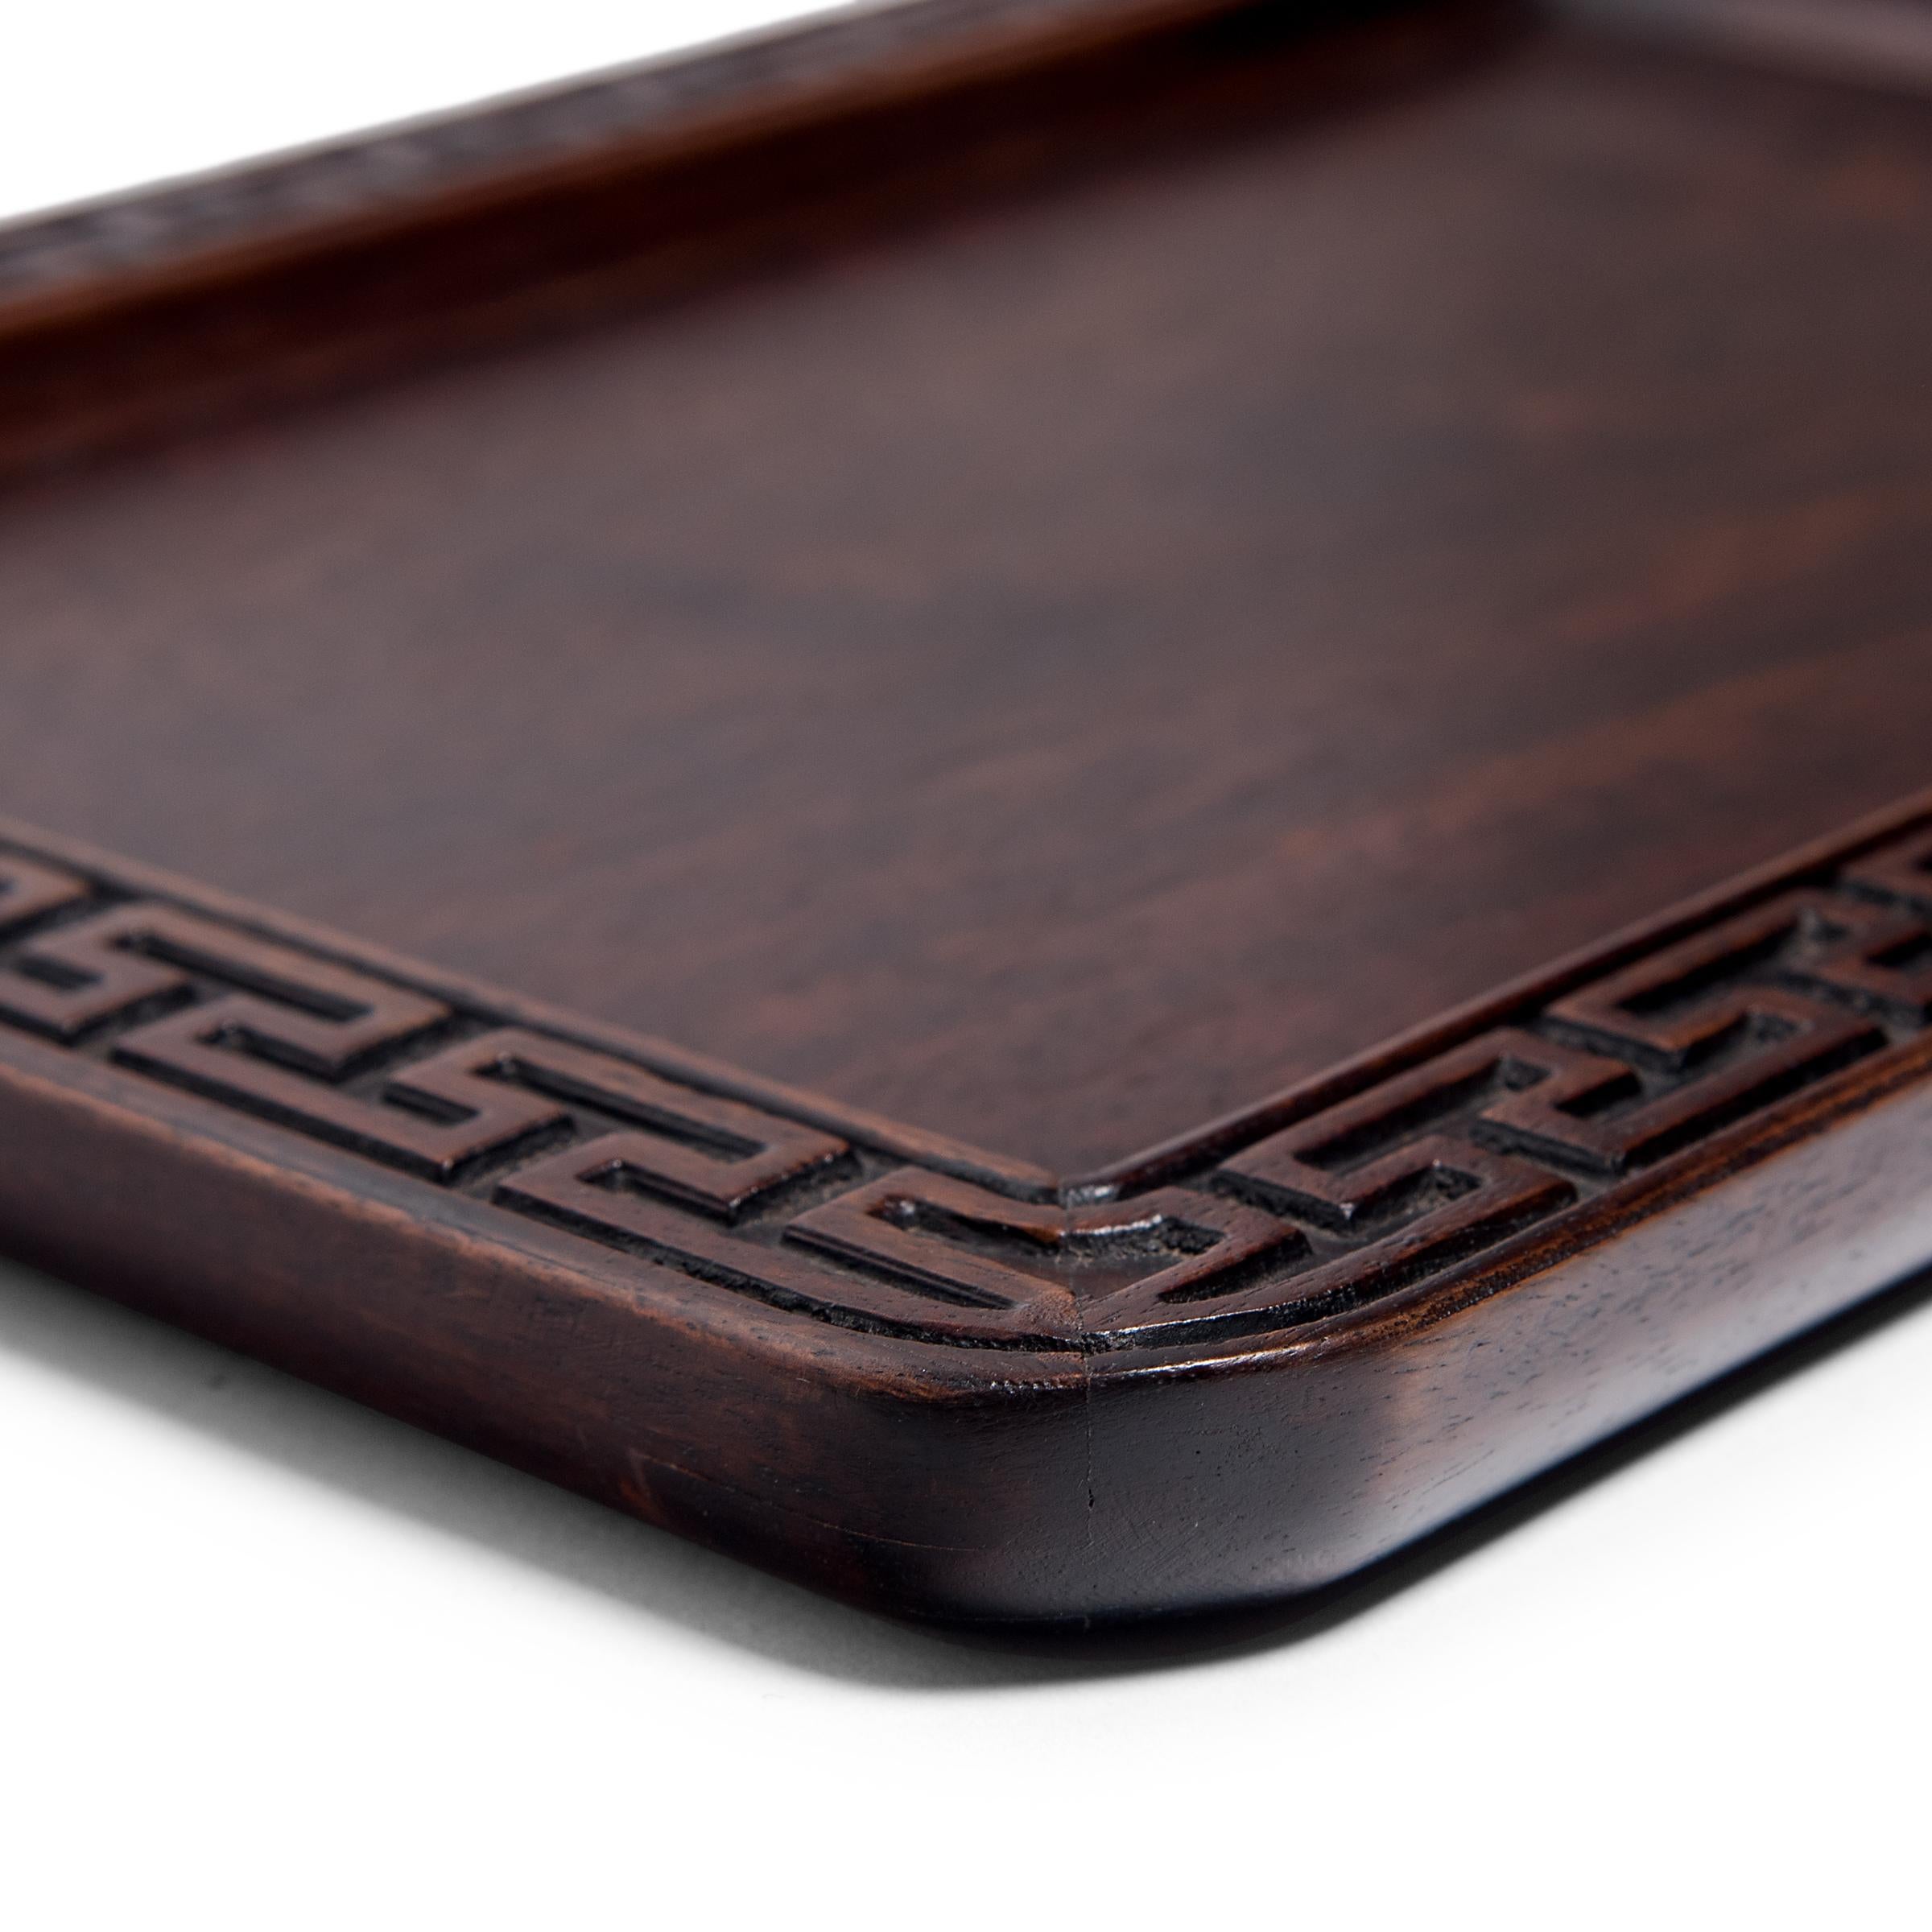 Beautifully carved of a fine-grained hardwood, this late 19th century tray reflects the Qing-dynasty literati's taste for fine materials and balanced proportions. Once used to serve tea or hold scholarly implements, the shallow tray is enclosed in a